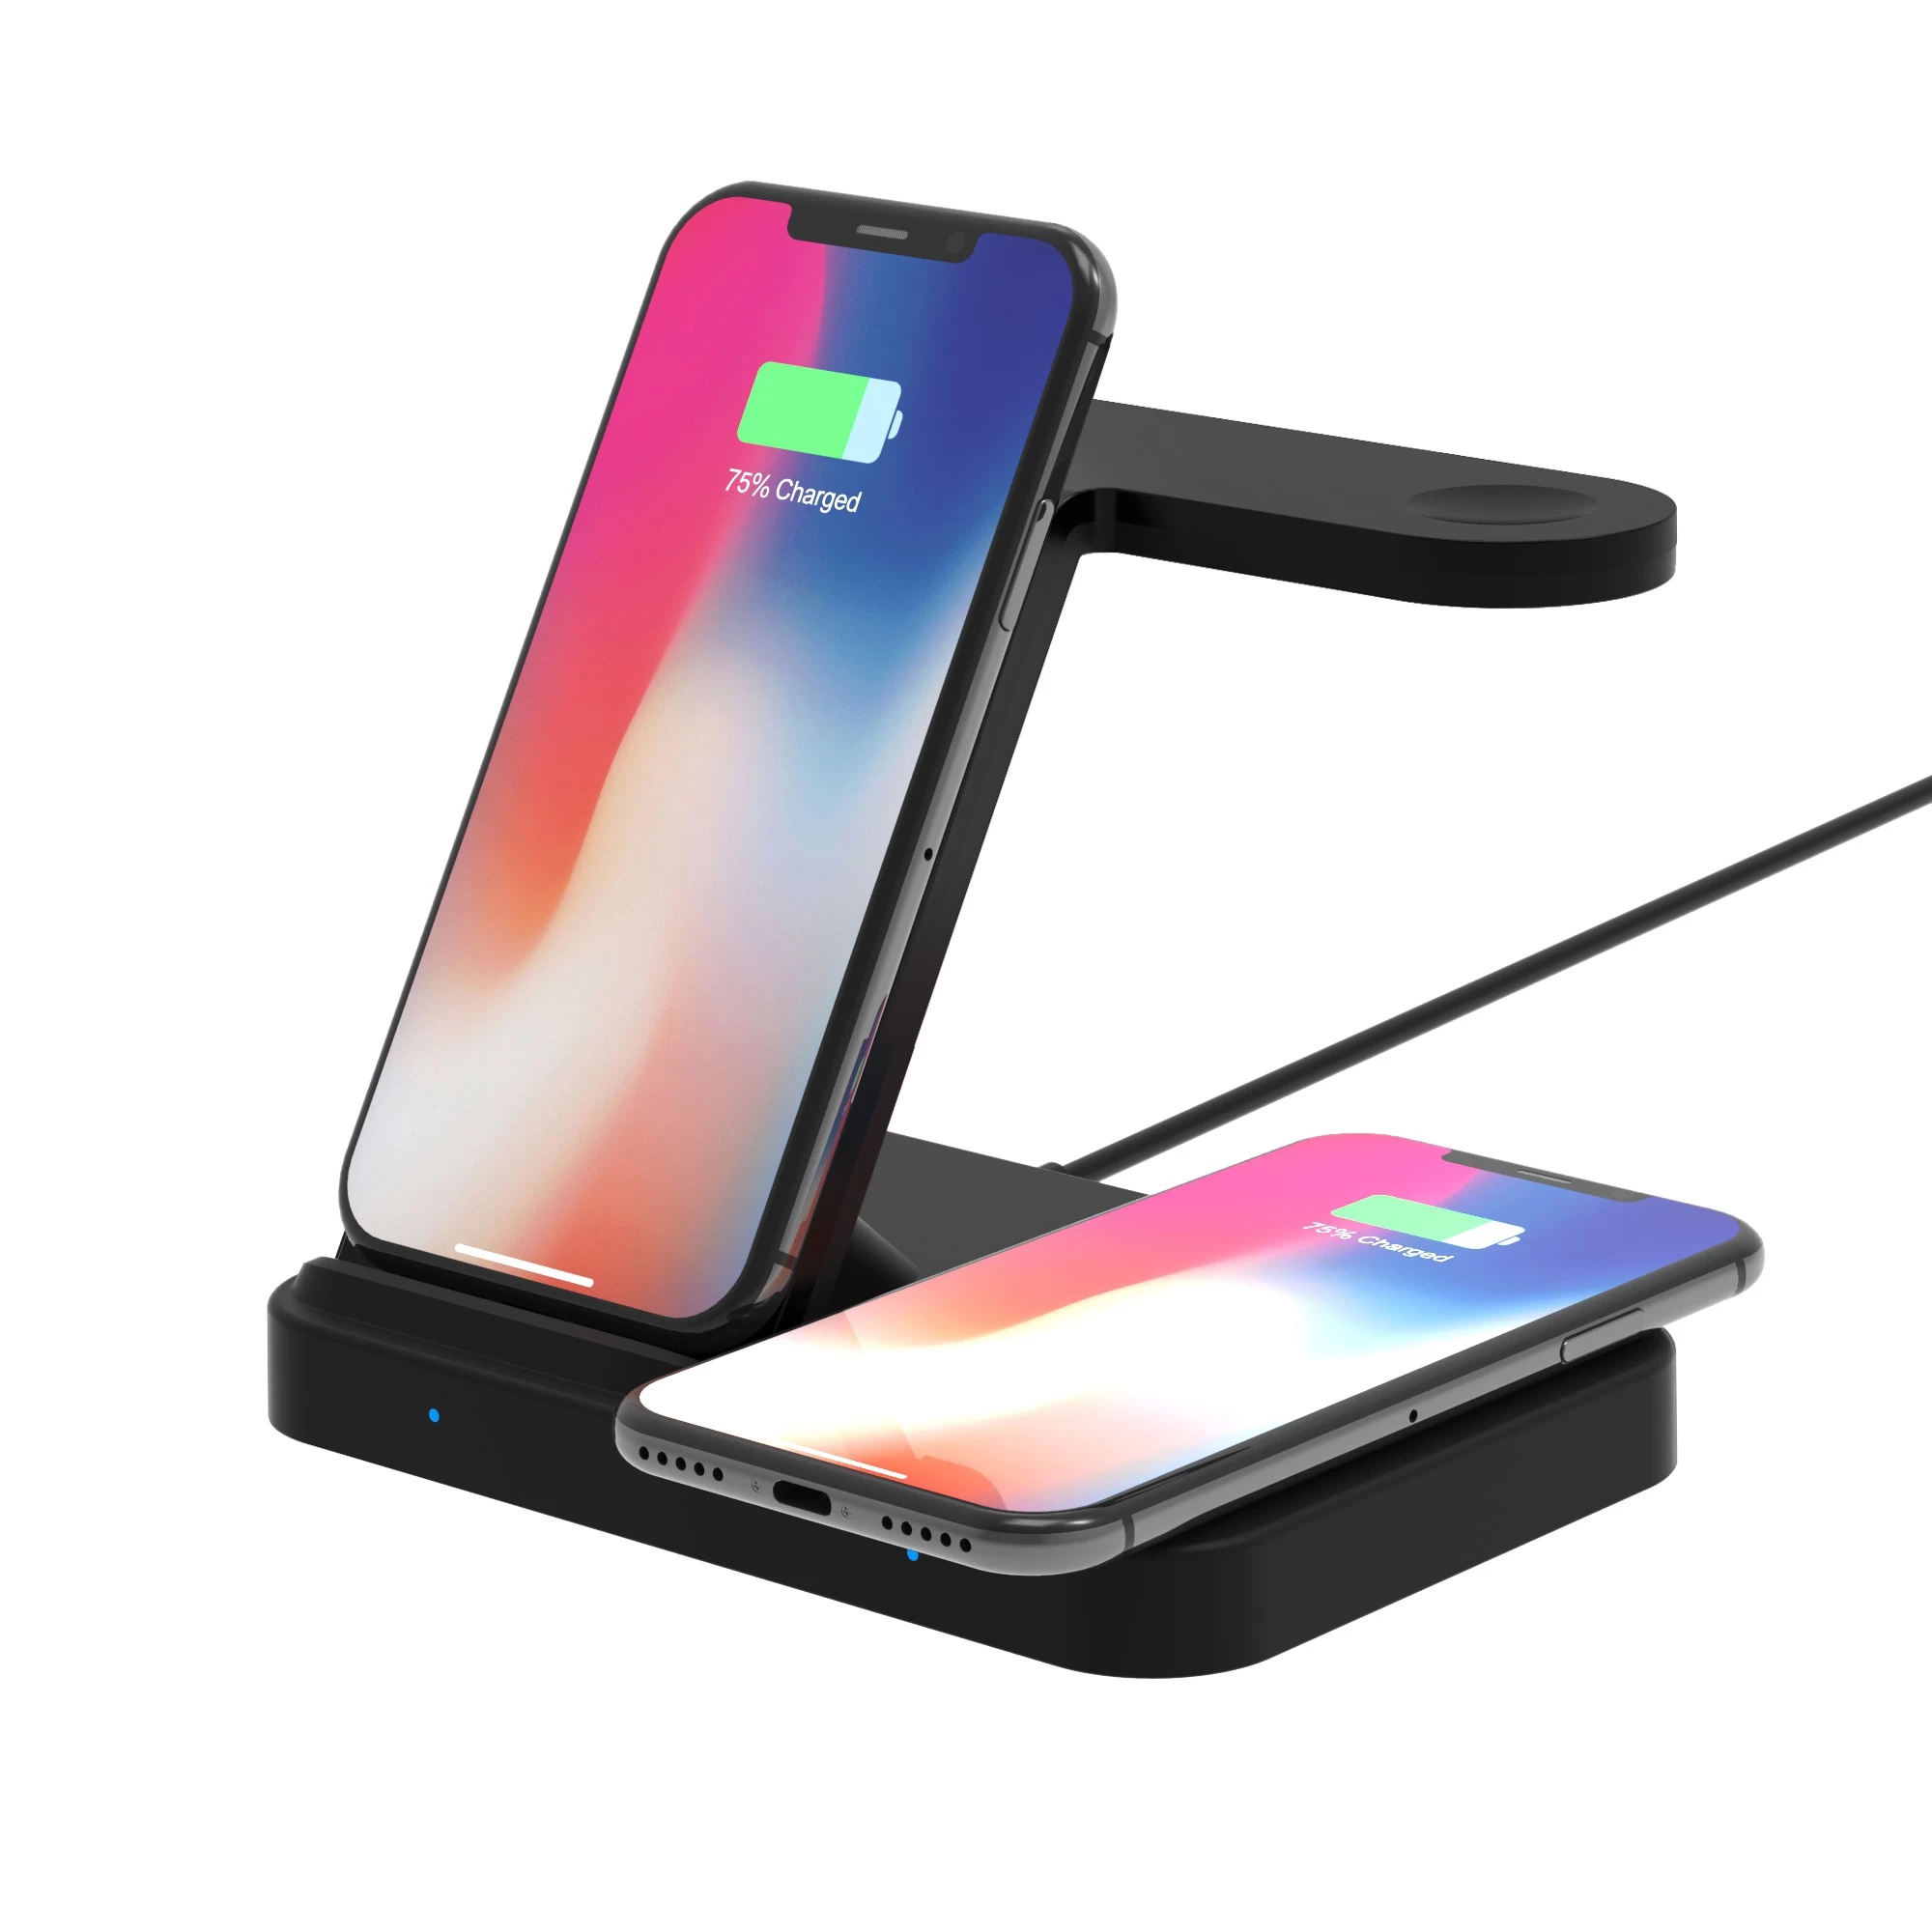 https://cdn.cloudbf.com/thumb/format/mini_xsize/upfile/170/product_o/Private-Mould-3-in-1-Fast-Wireless-Charging-Stand-for-iPhone-11-Pro-XS-Max-and-AirPods-Pro-2-and-iWatch-Series-5-4-3-2-1-and-Galaxy-Watch-and-Galaxy-Buds(MH-Q475B)_7.jpg.webp